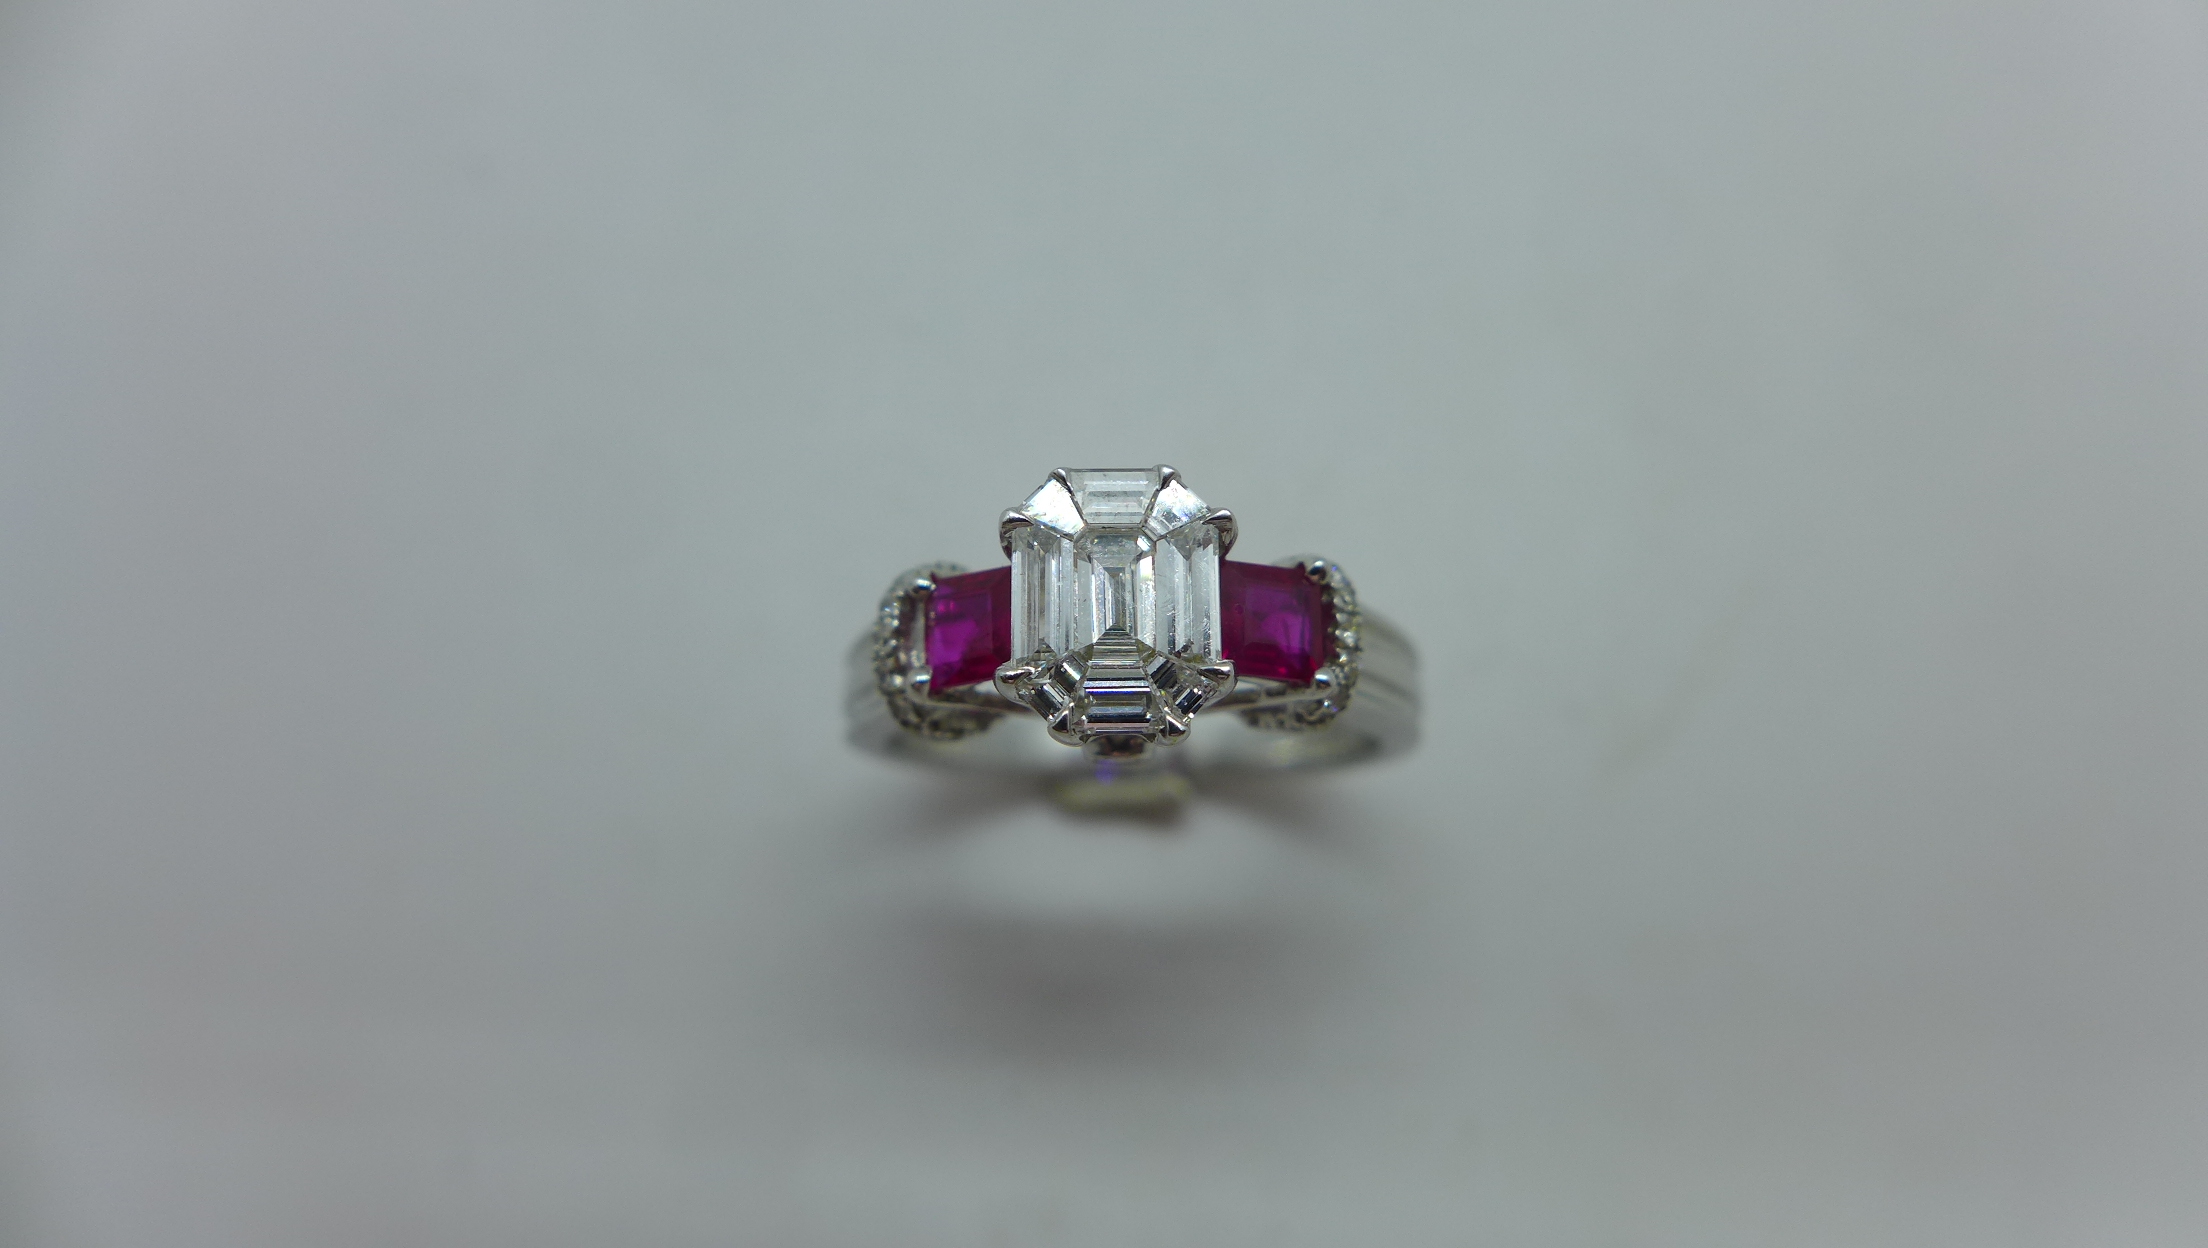 An 18ct white gold diamond and ruby ring with a centre 9 piece diamond, emerald cut measuring 7mm